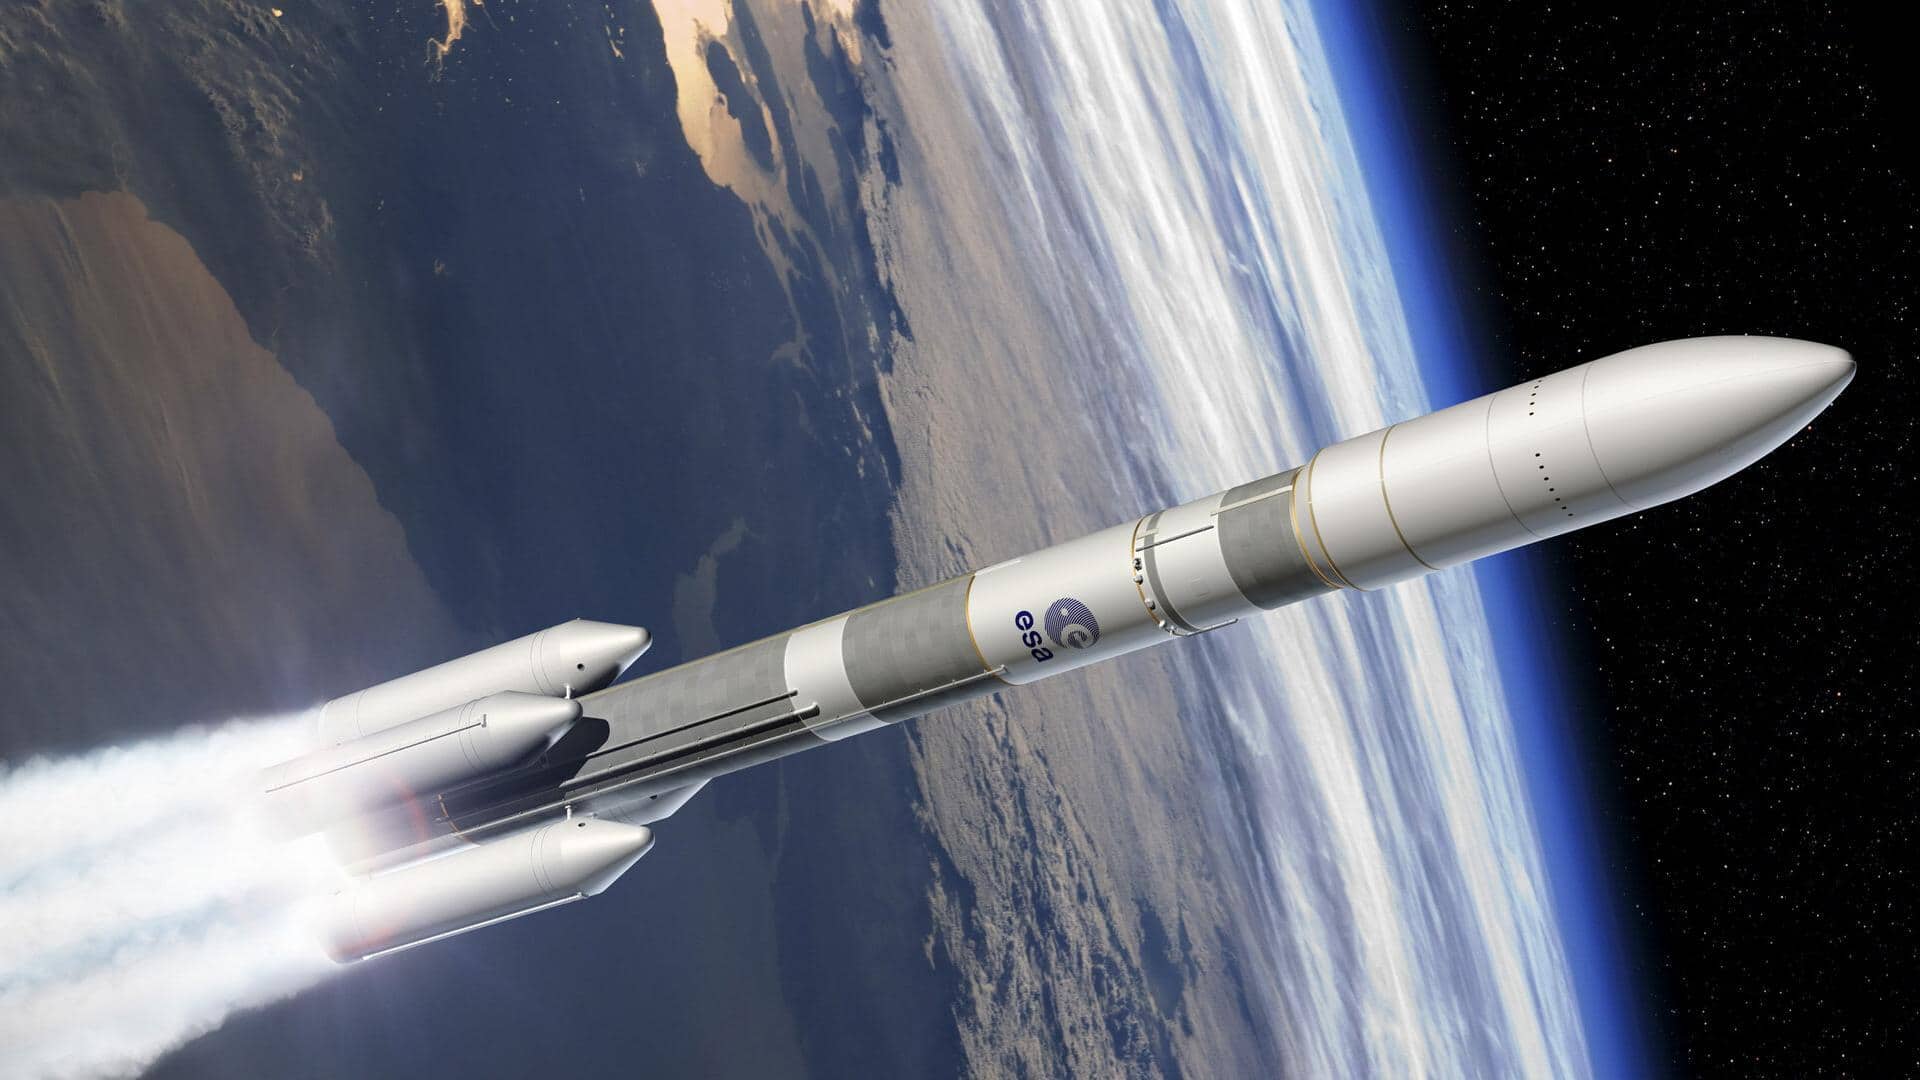 Key facts about ESA's Ariane 6 rocket